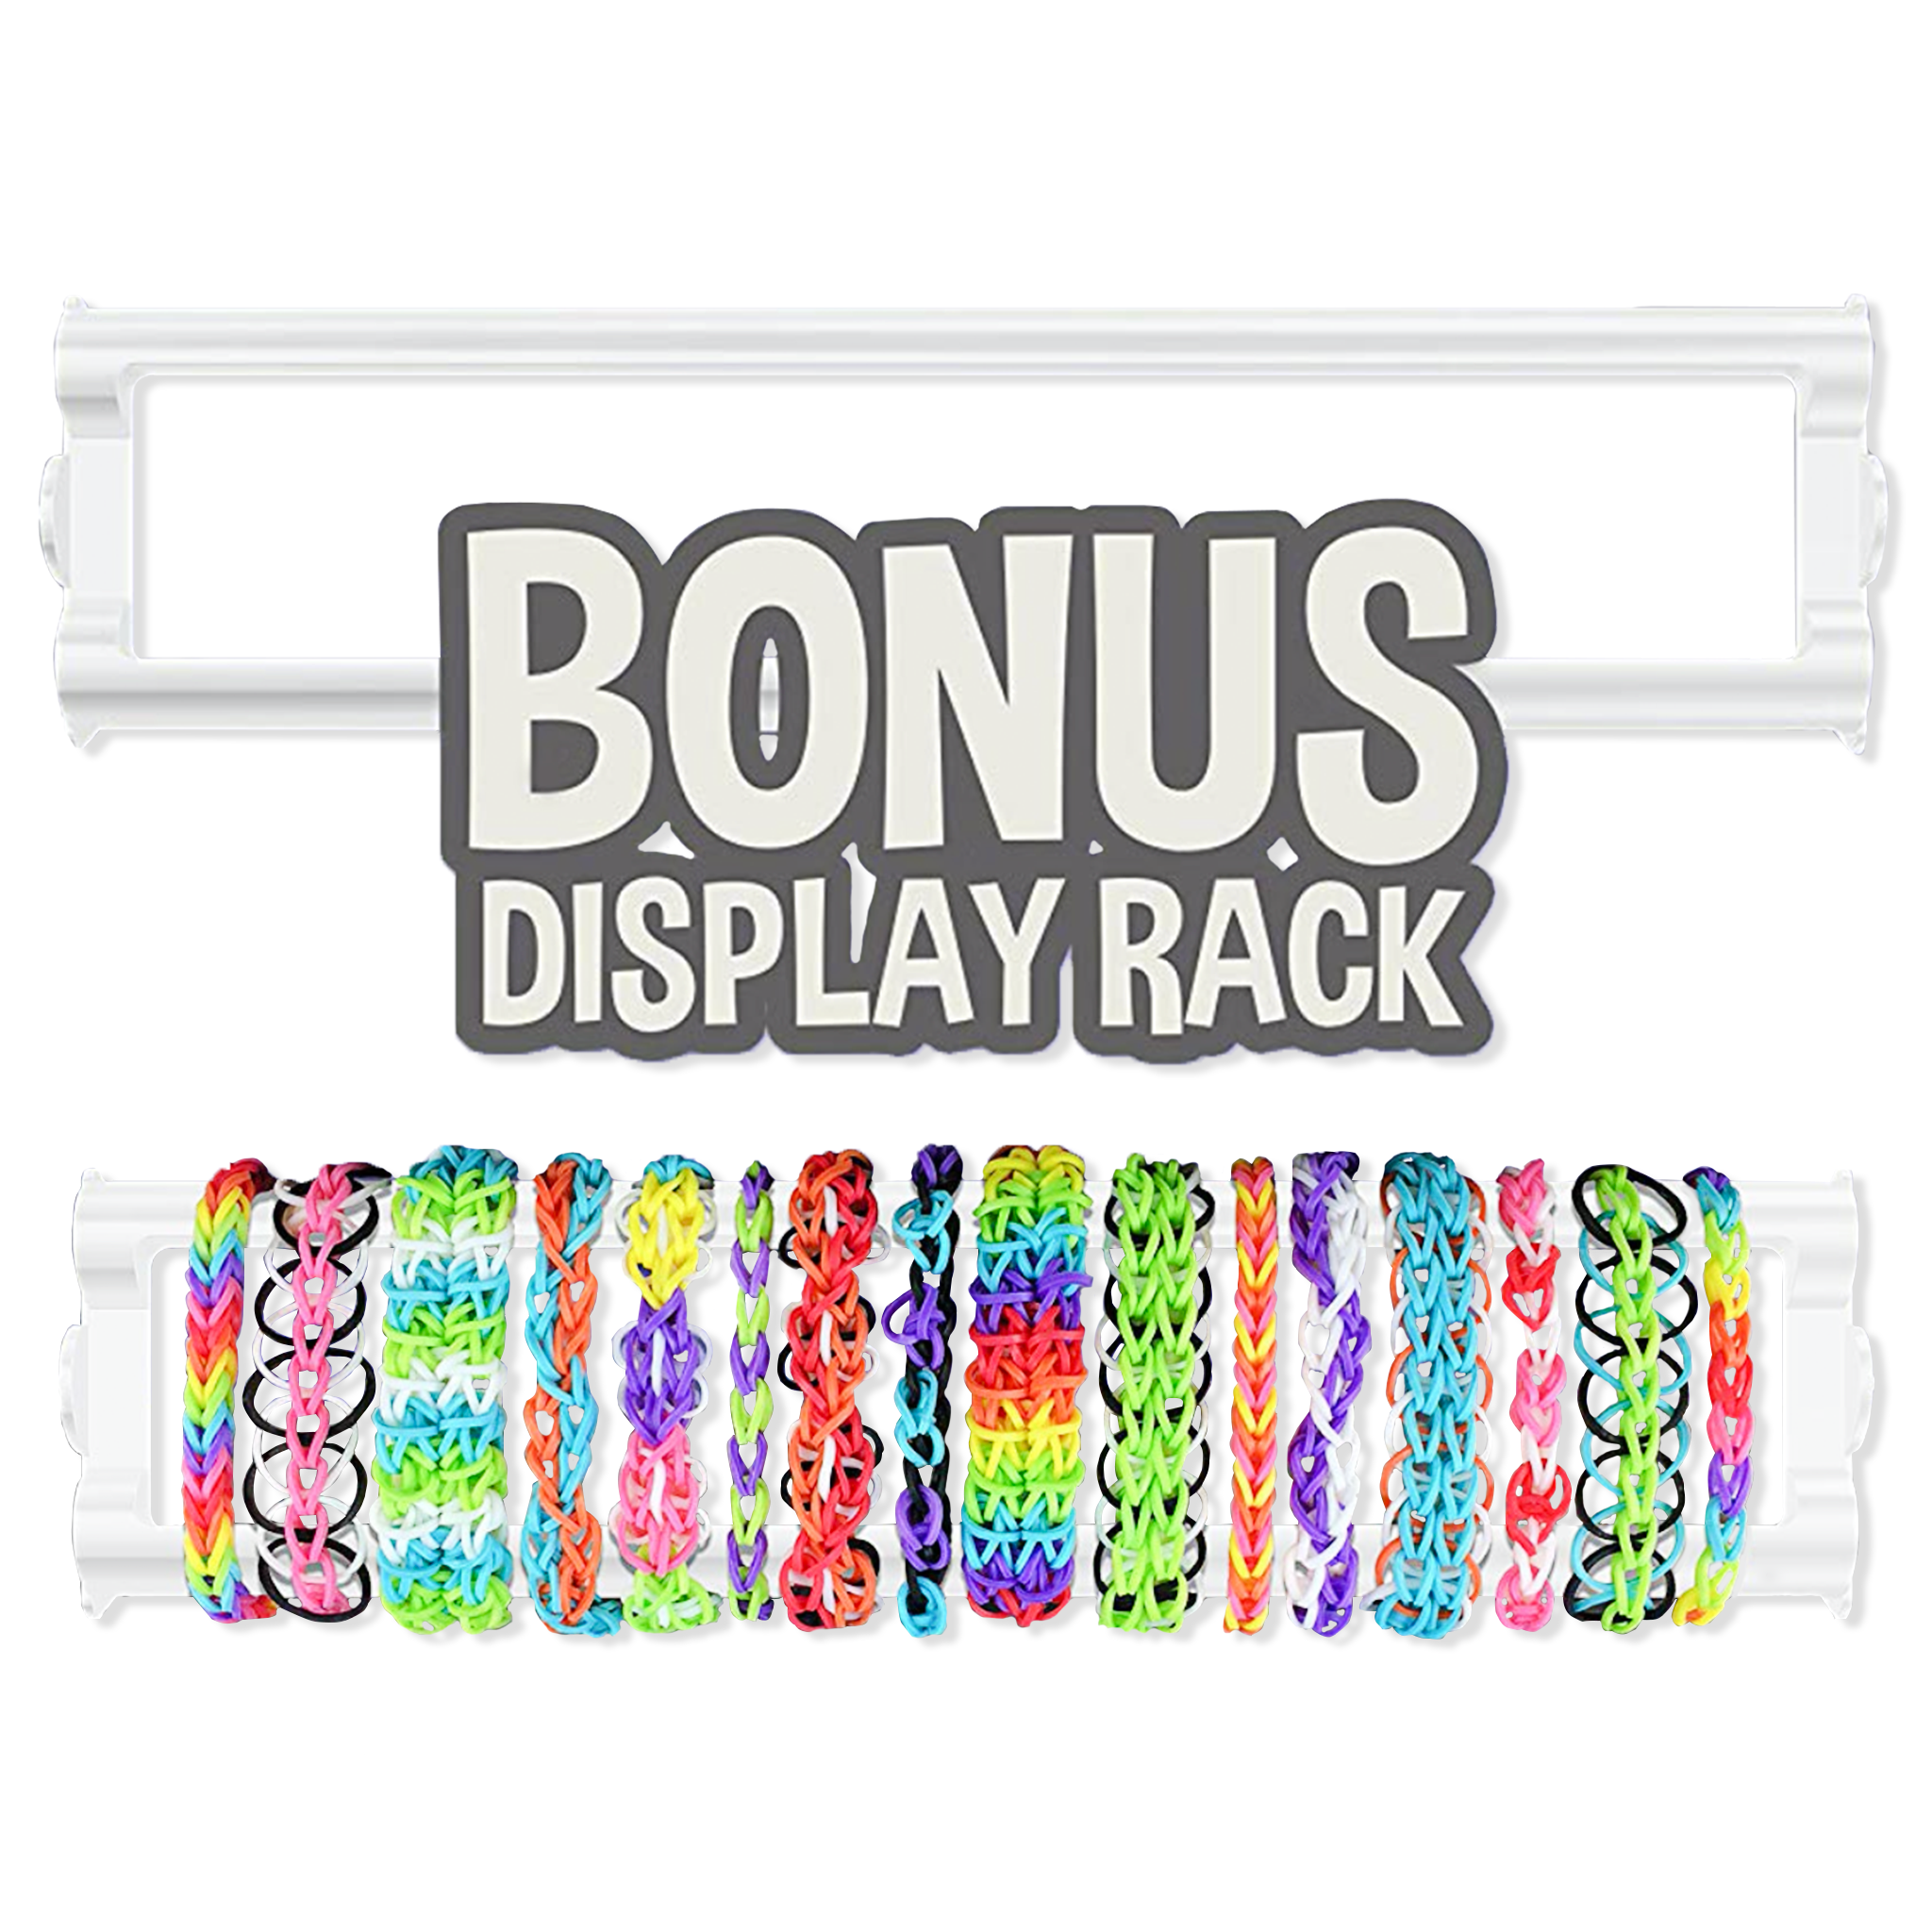 Amazon.com: Cra-Z-Art Cra-Z-Loom Ultimate Rubber Band Bracelet Maker  Activity Kit for Ages 8 and Up (packaging may vary) : Toys & Games